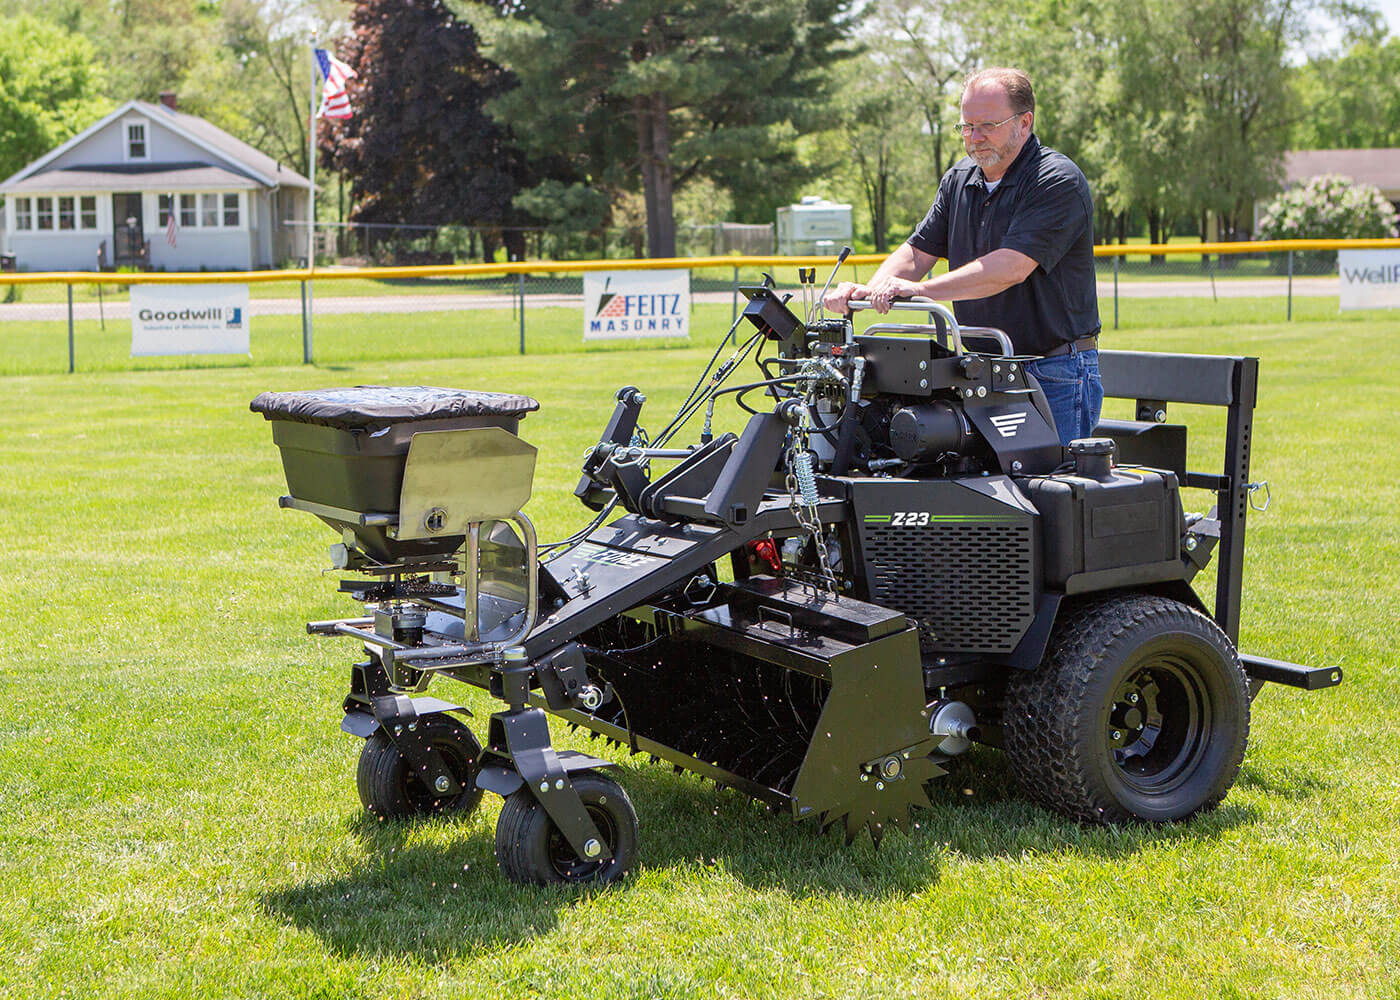 Force overseeding attachment used on baseball or softball field turf 